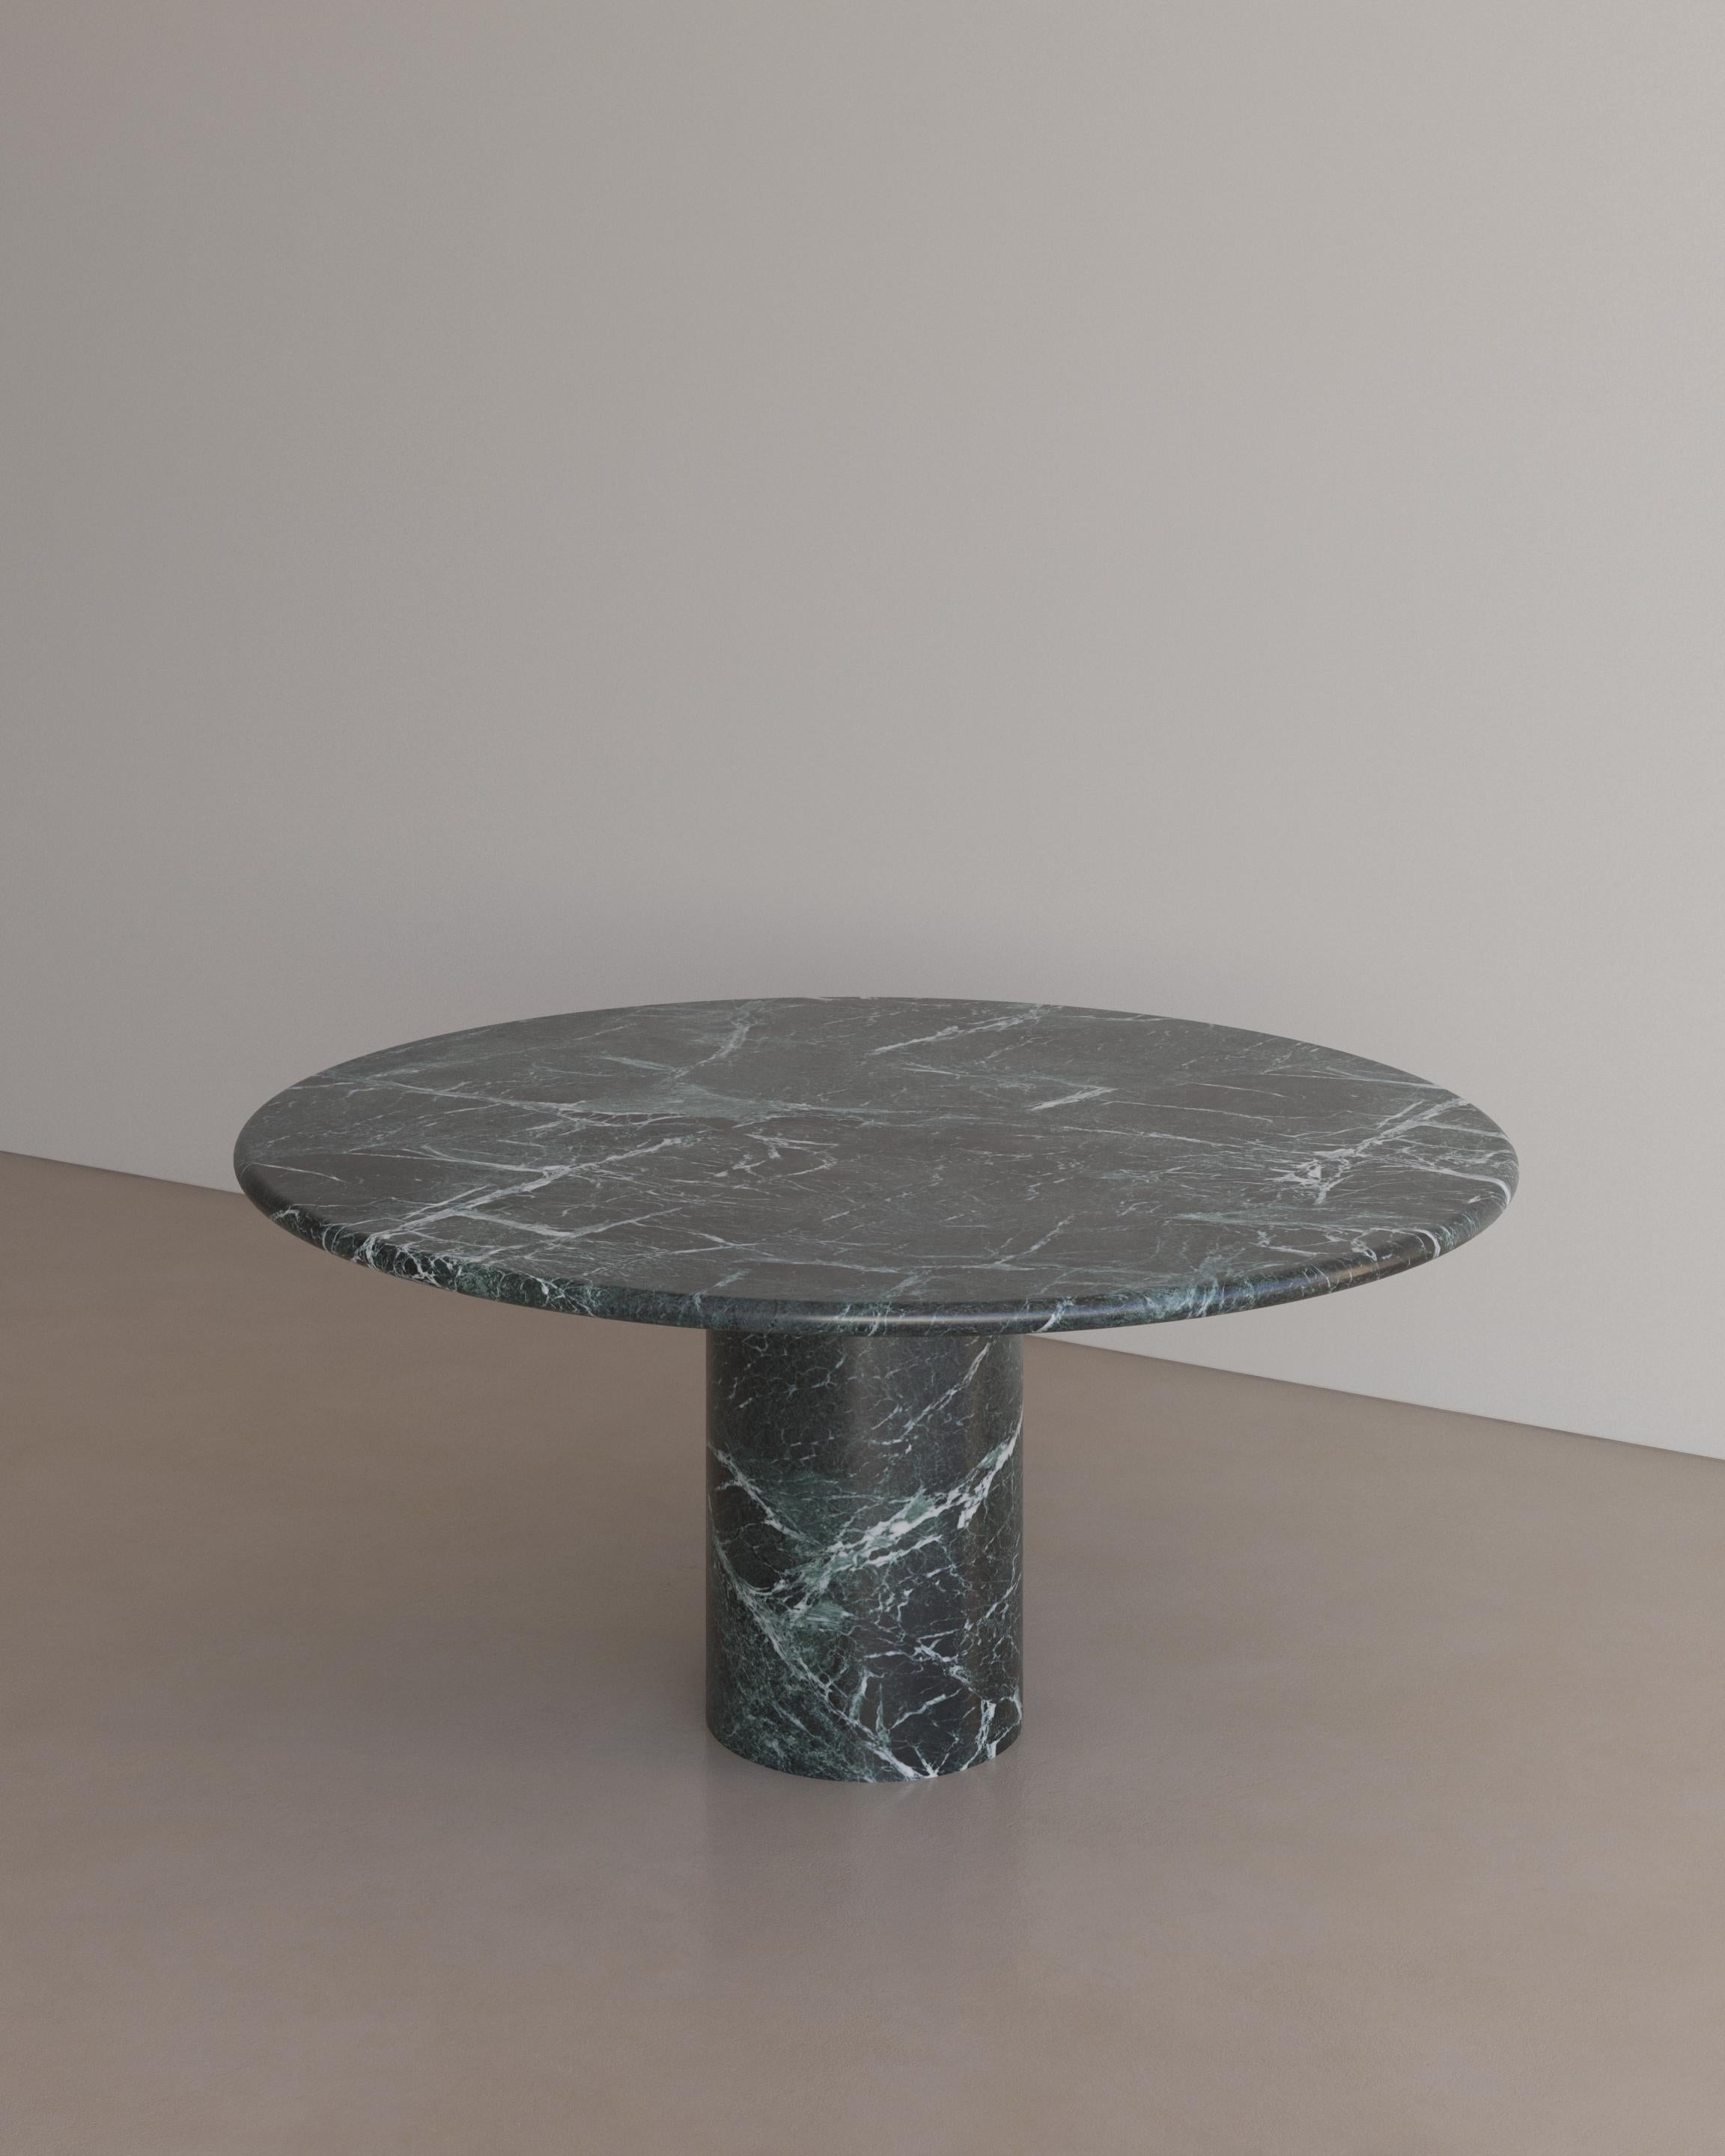 Australian La Mer Quartzite Voyage Dining Table i by the Essentialist For Sale